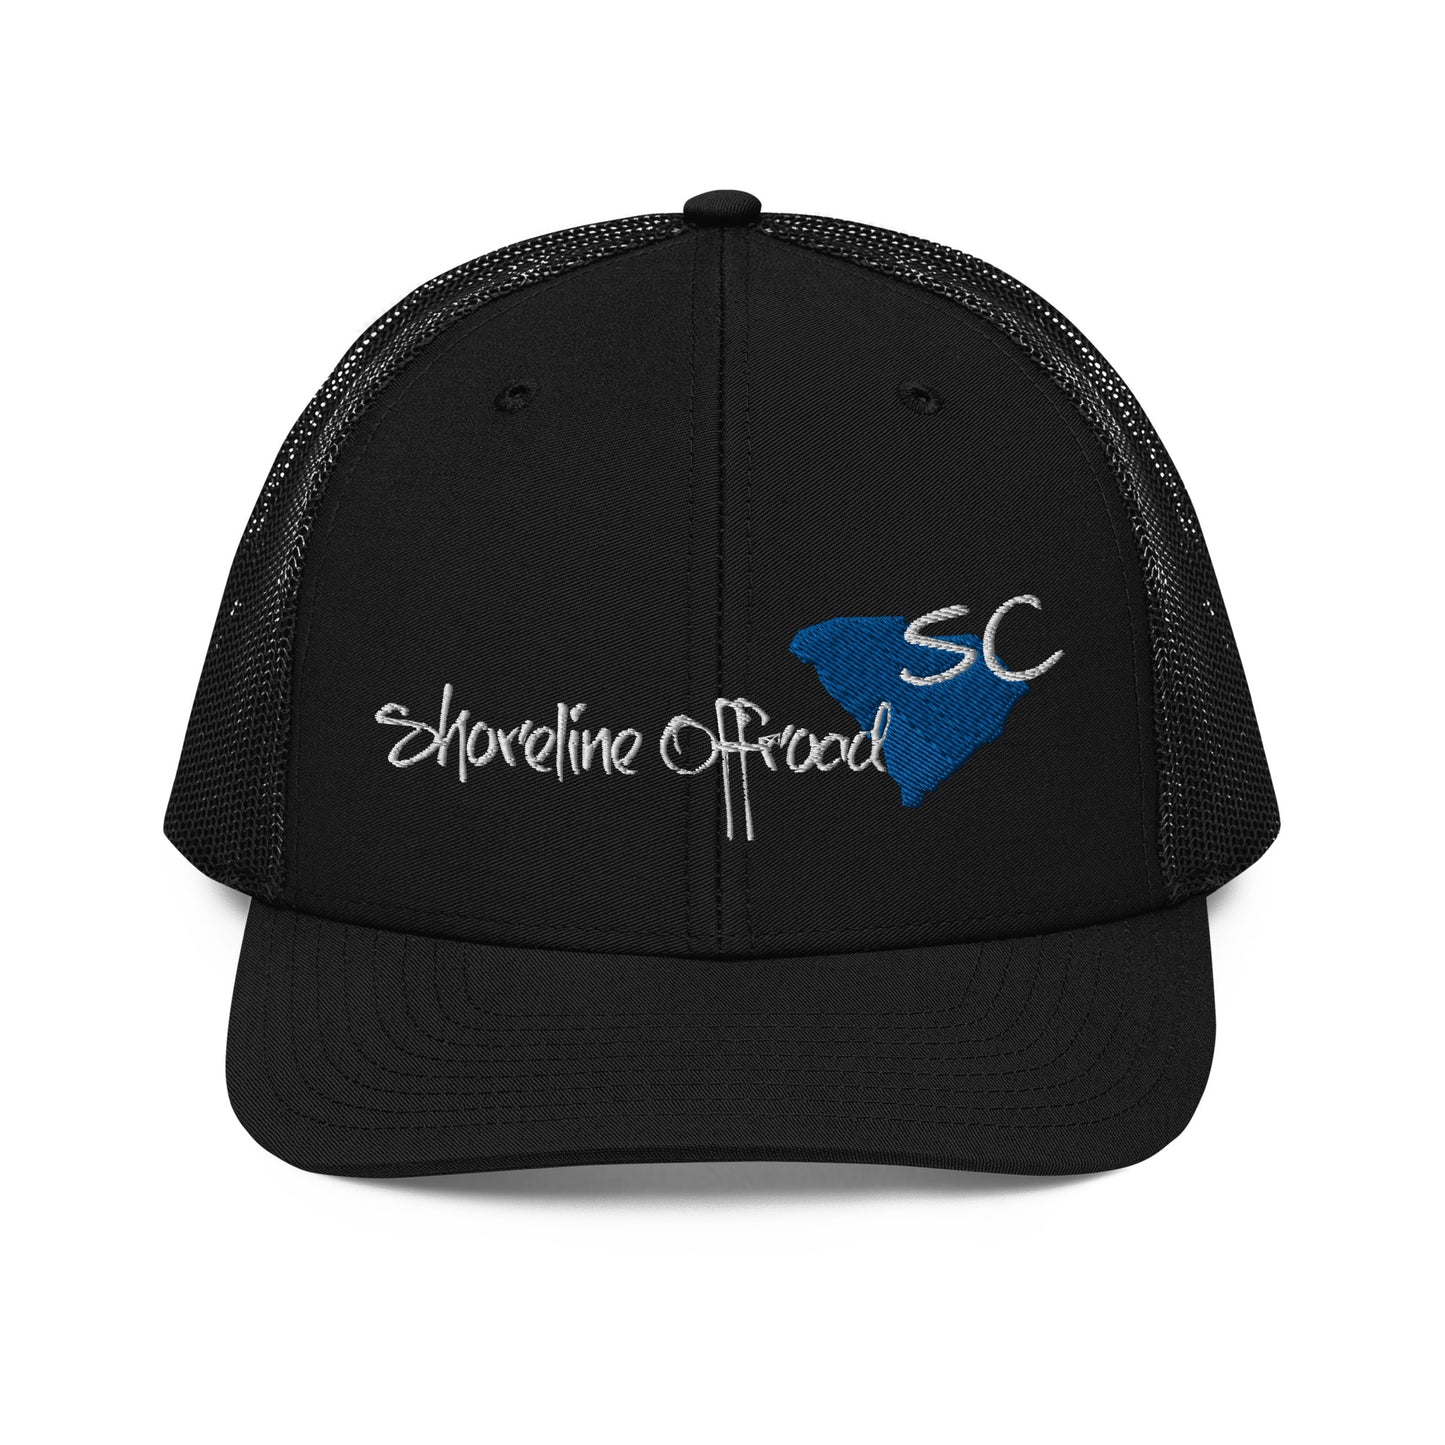 a black trucker hat with a blue and white logo